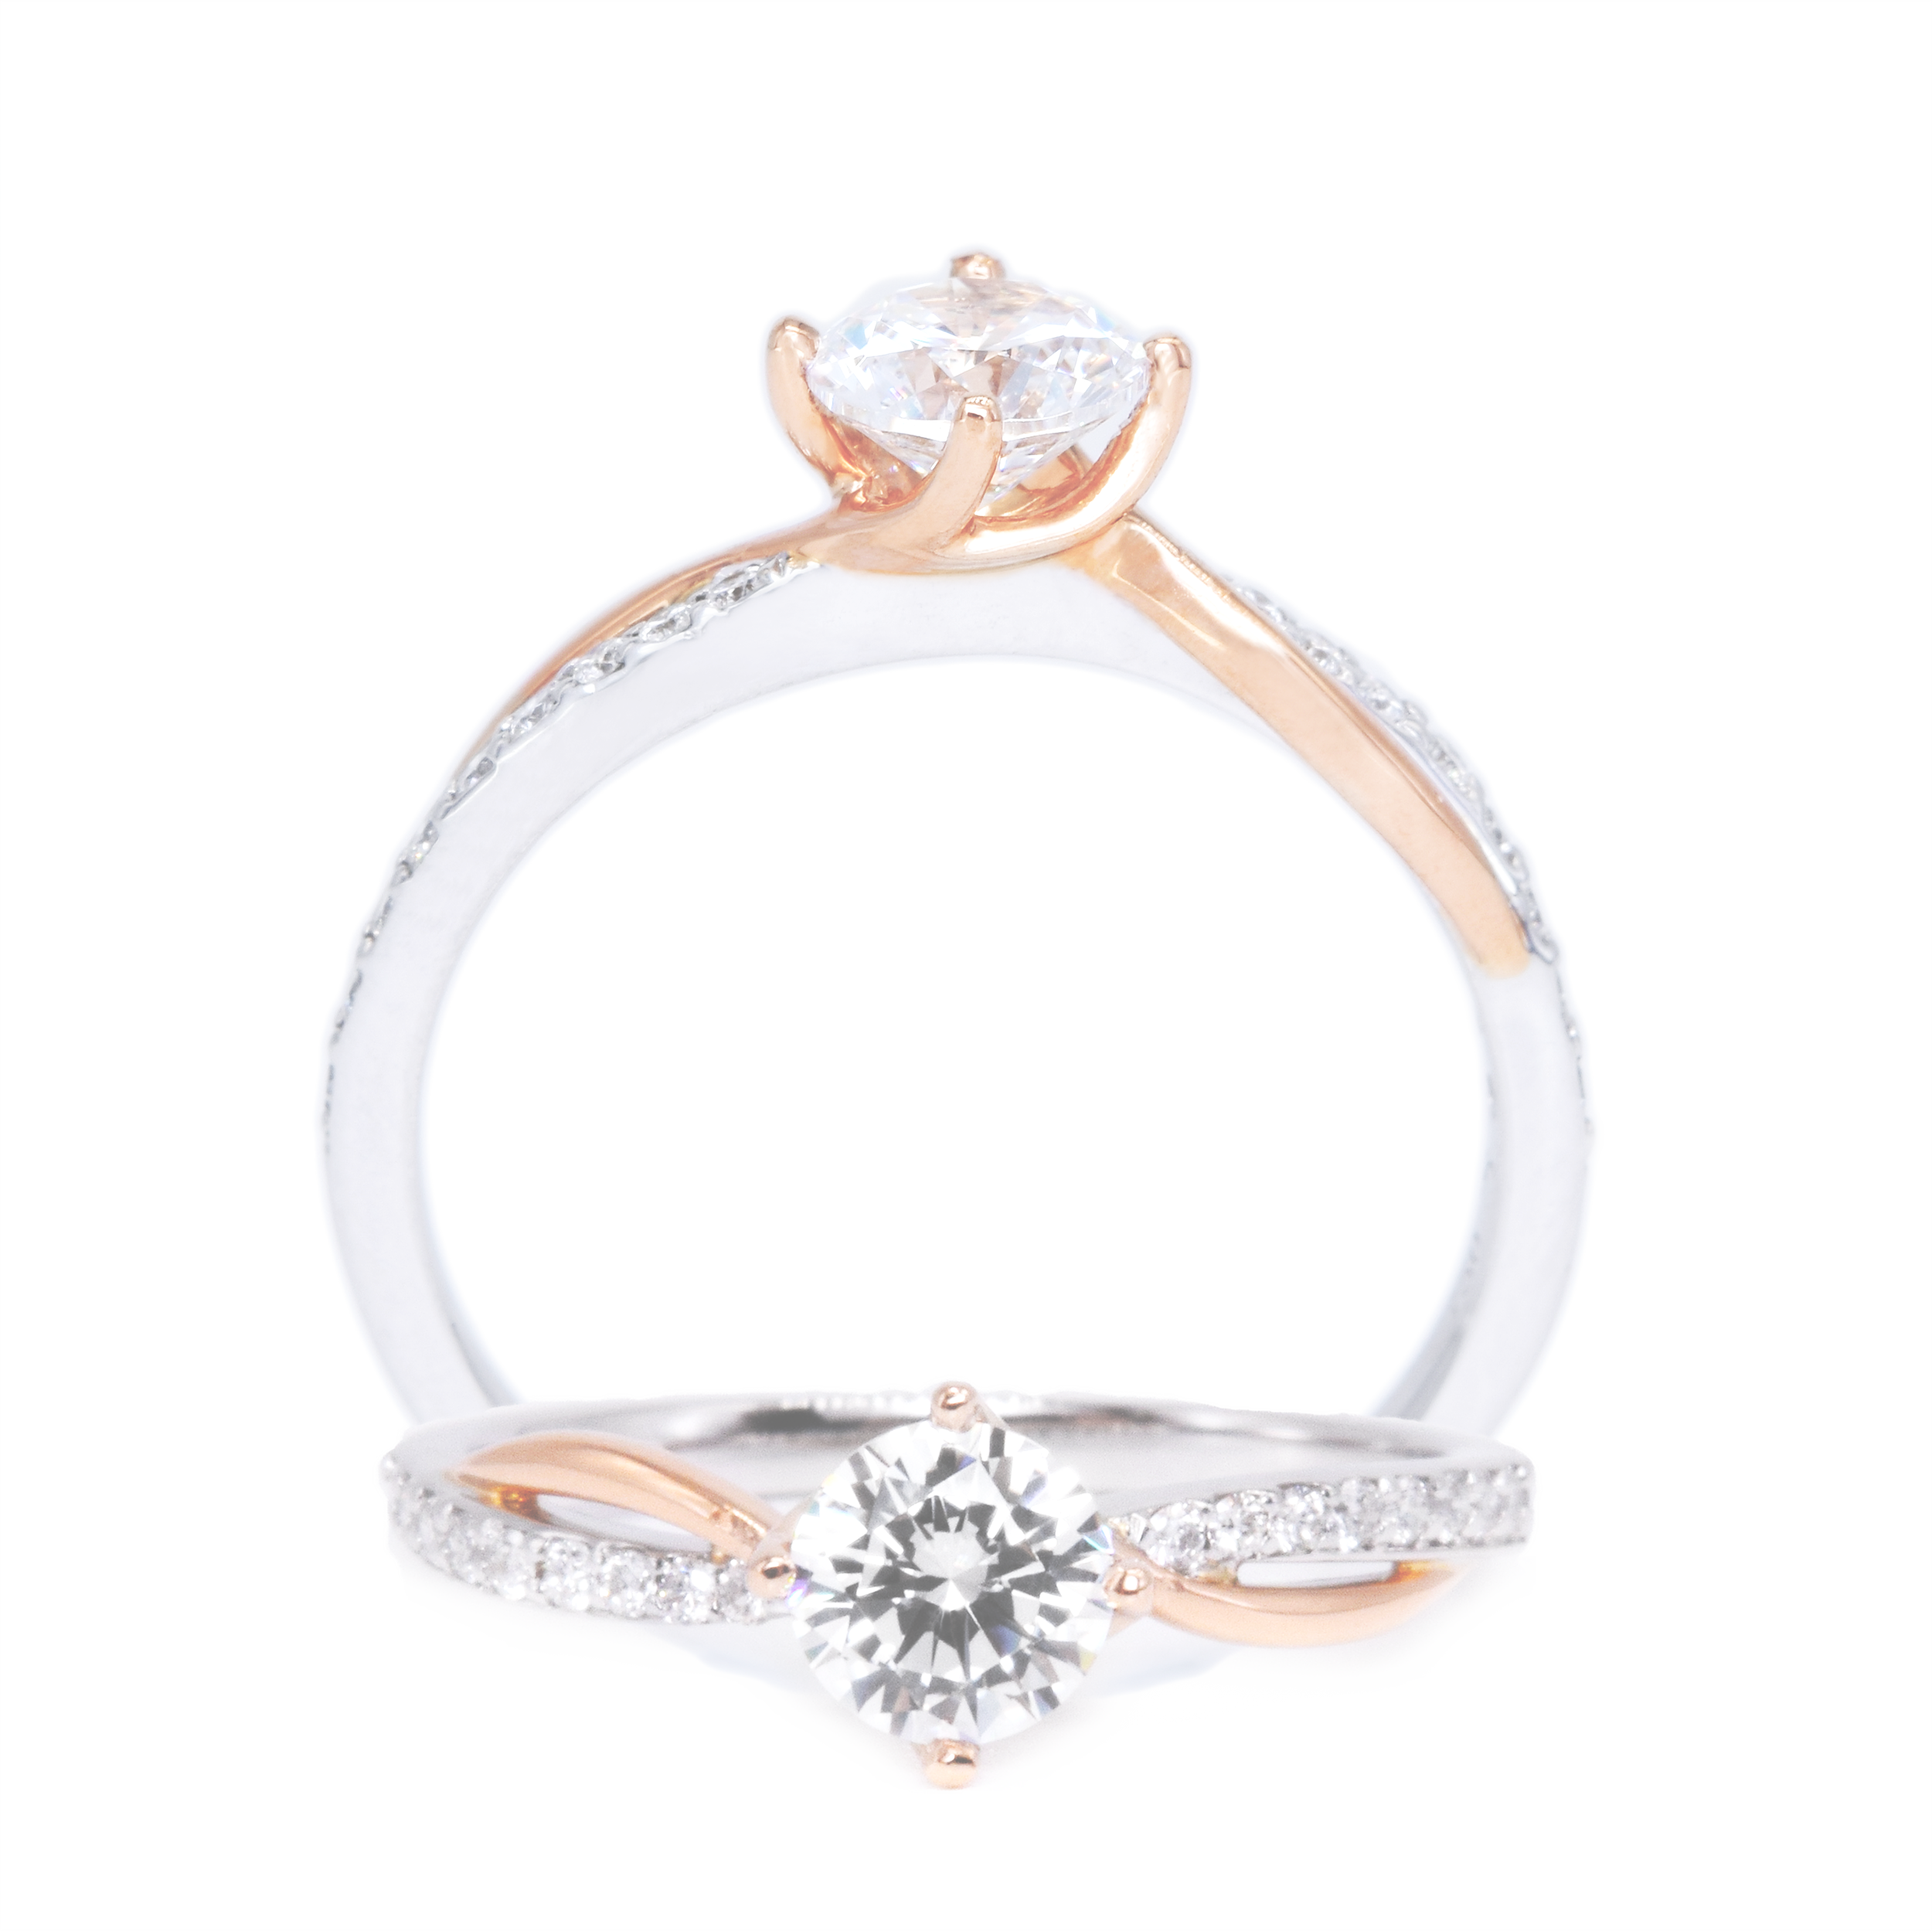 18 carat white w/rose gold Signature "Always" diamonds ring setting (setting only)